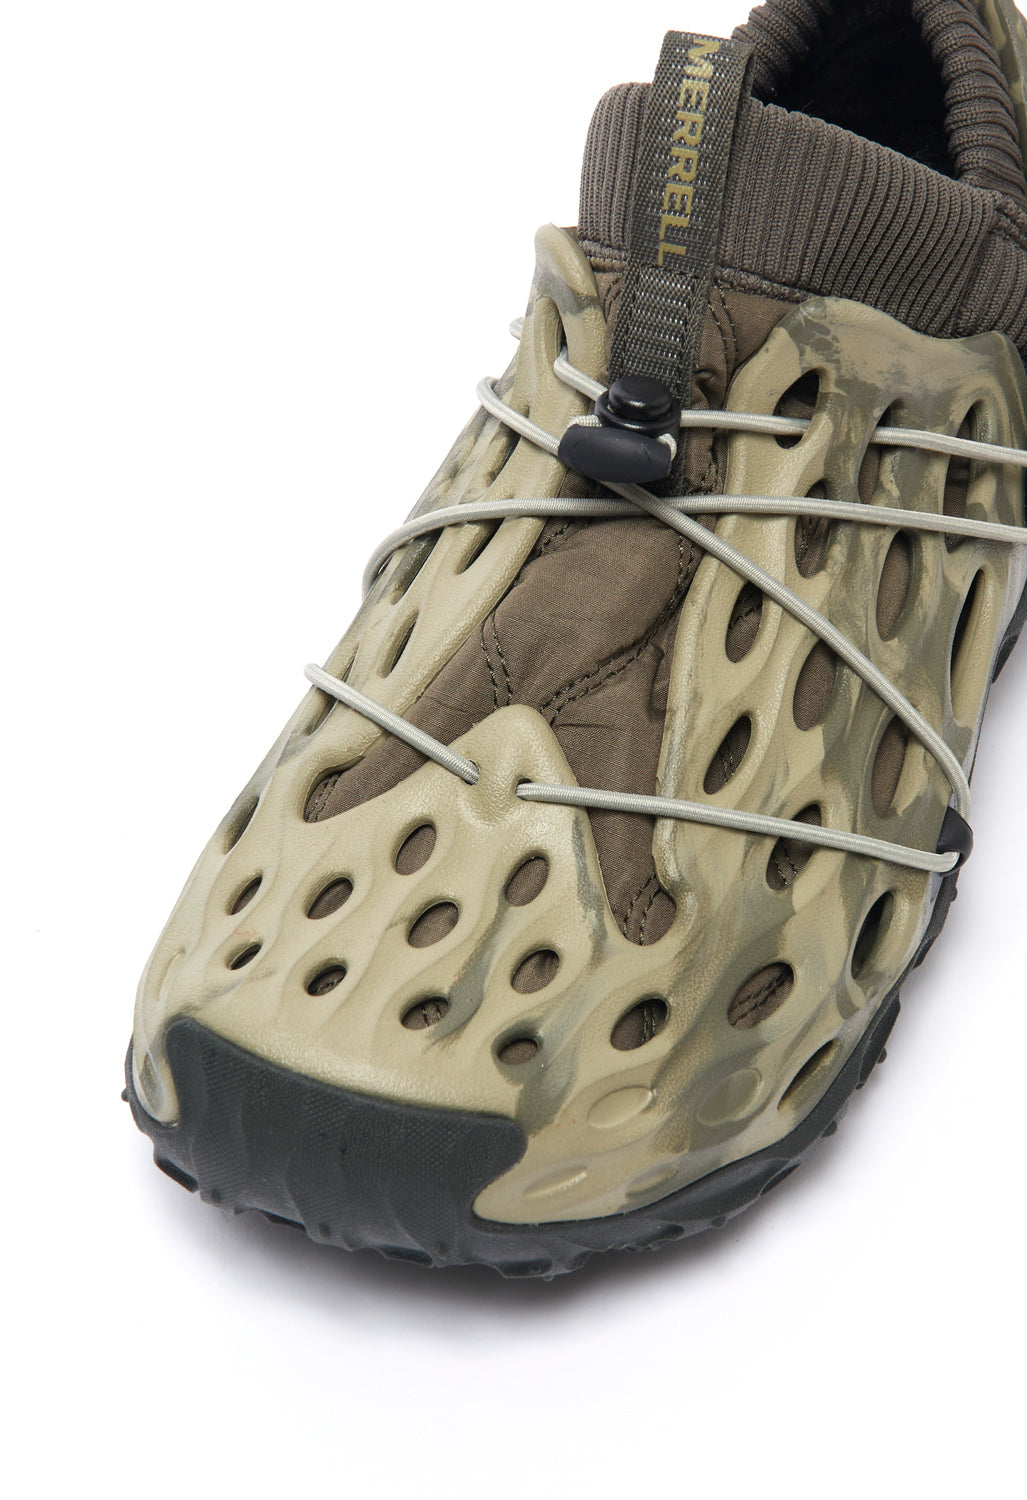 Merrell Hydro Moc AT Ripstop 1TRL Men's Shoes - Olive